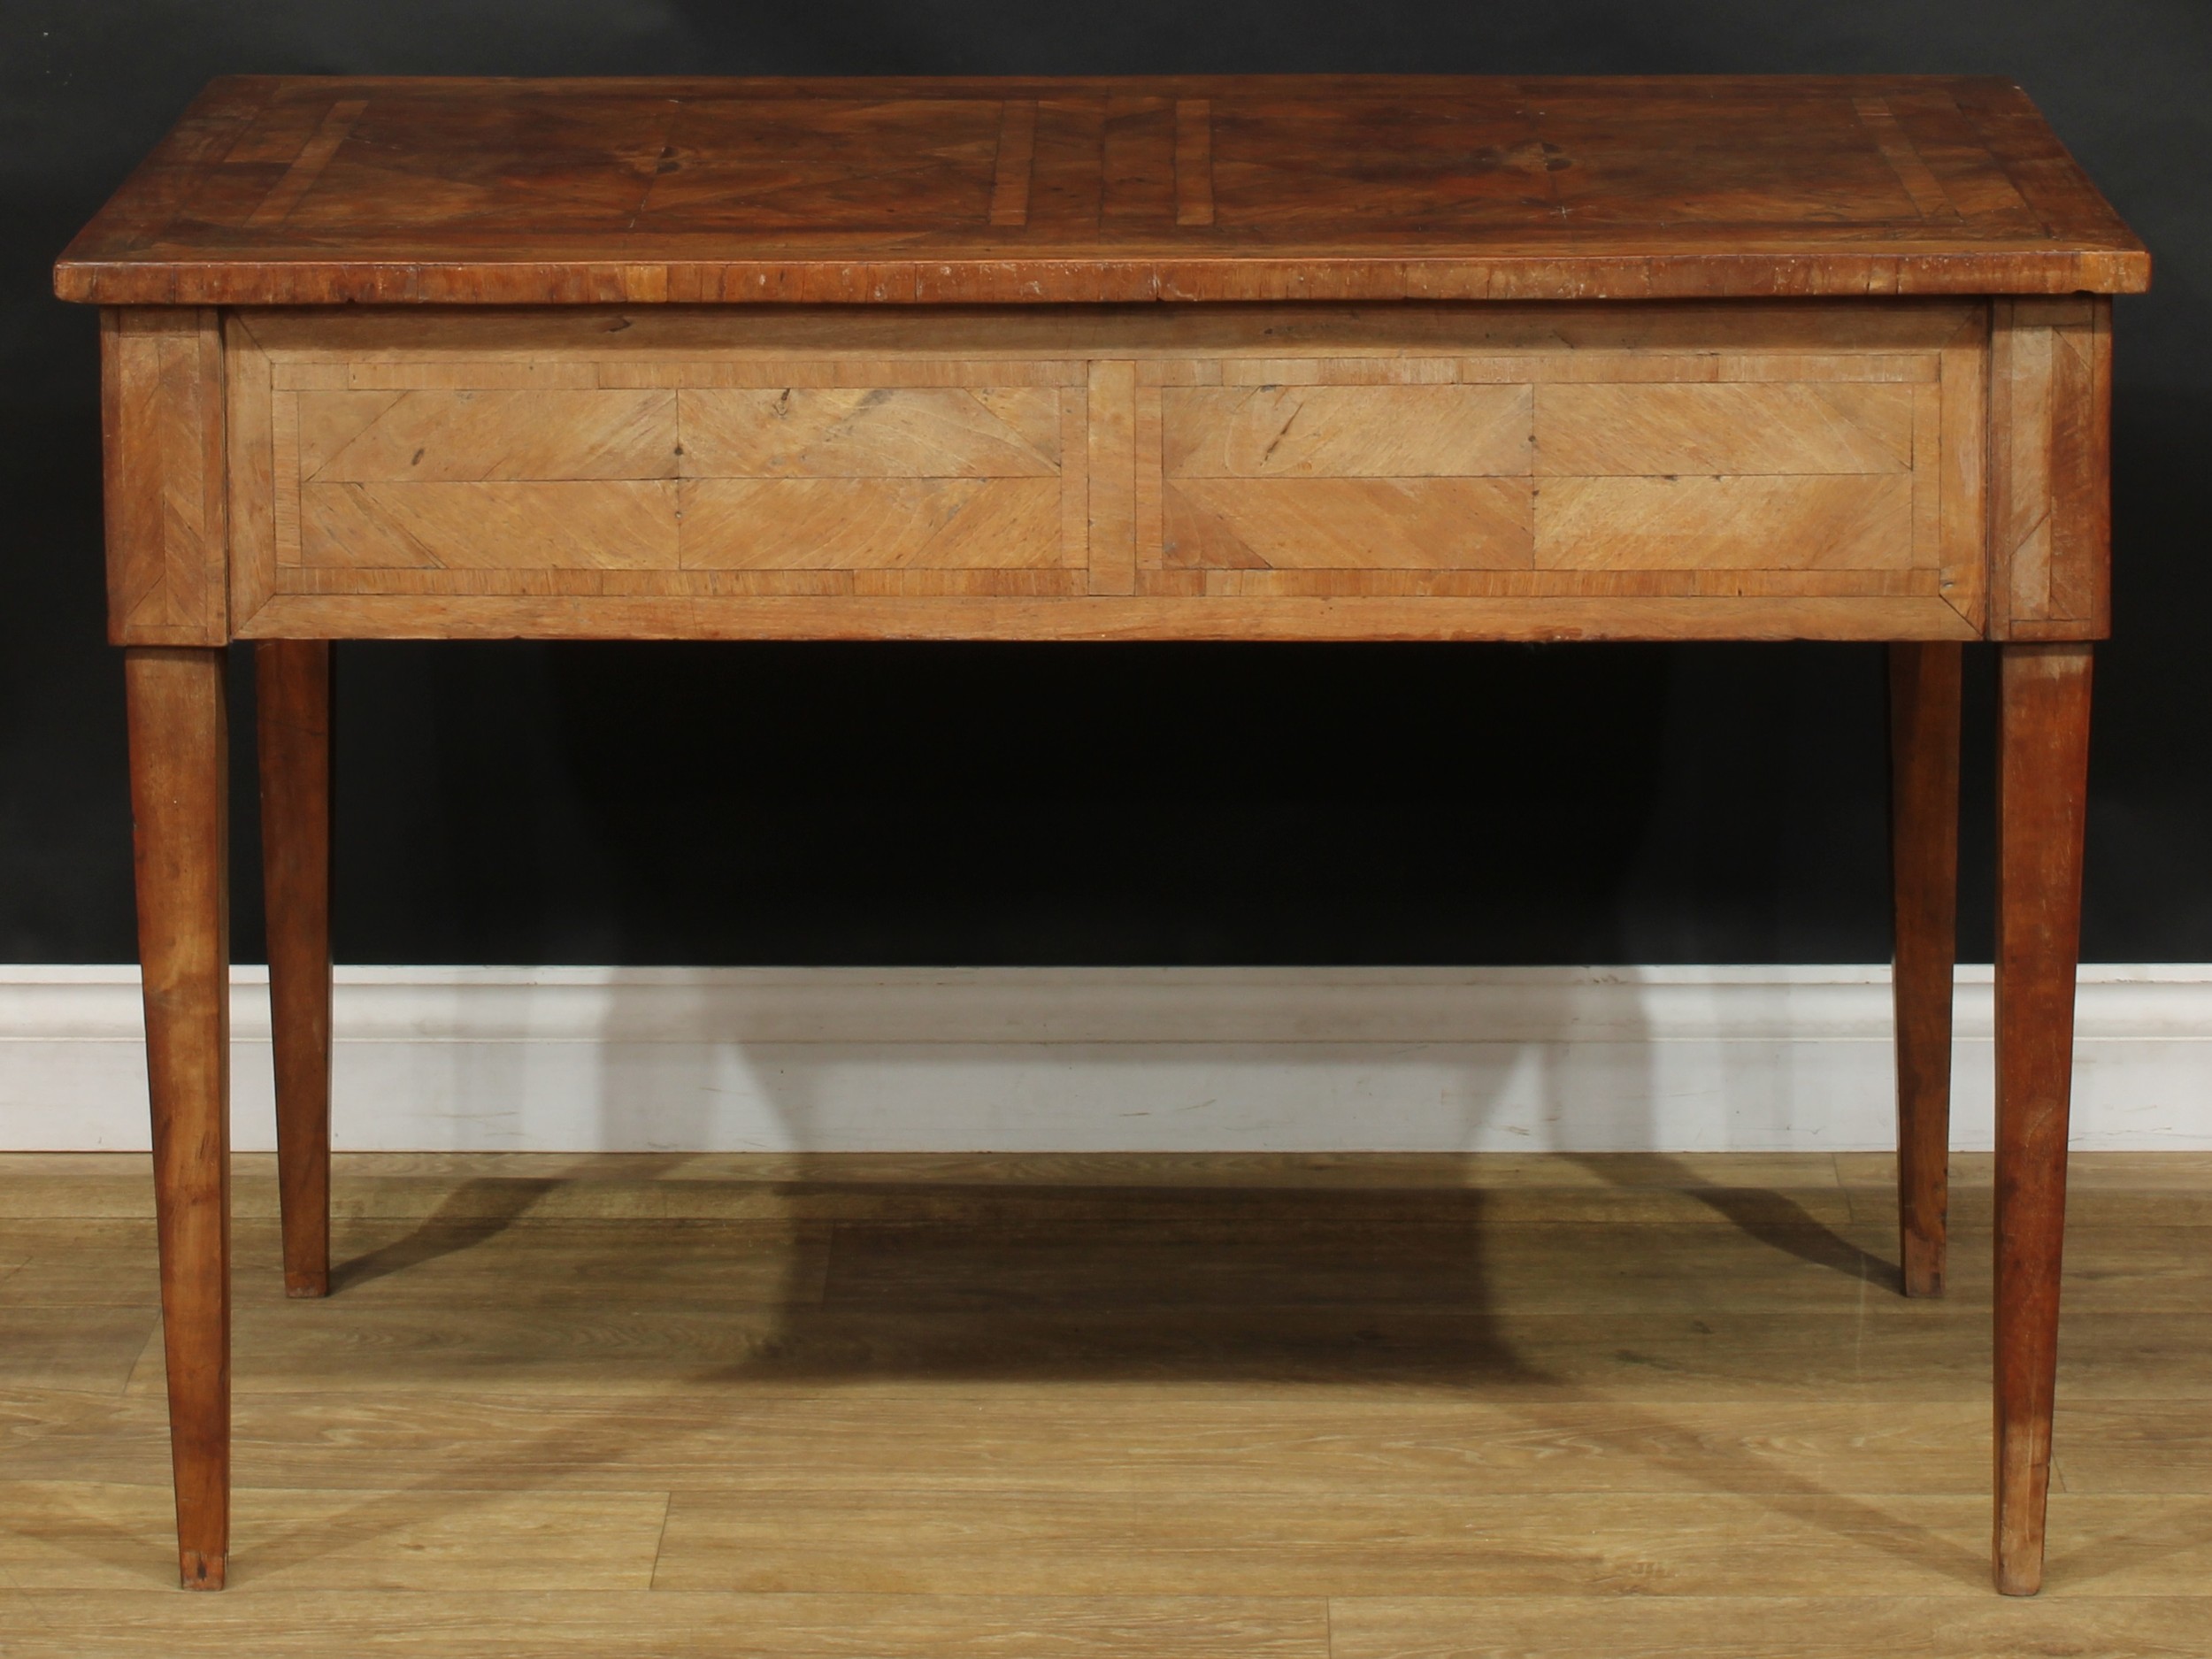 An 18th century French Provincial side table, rectangular top with geometric parquetry veneers, - Image 7 of 7